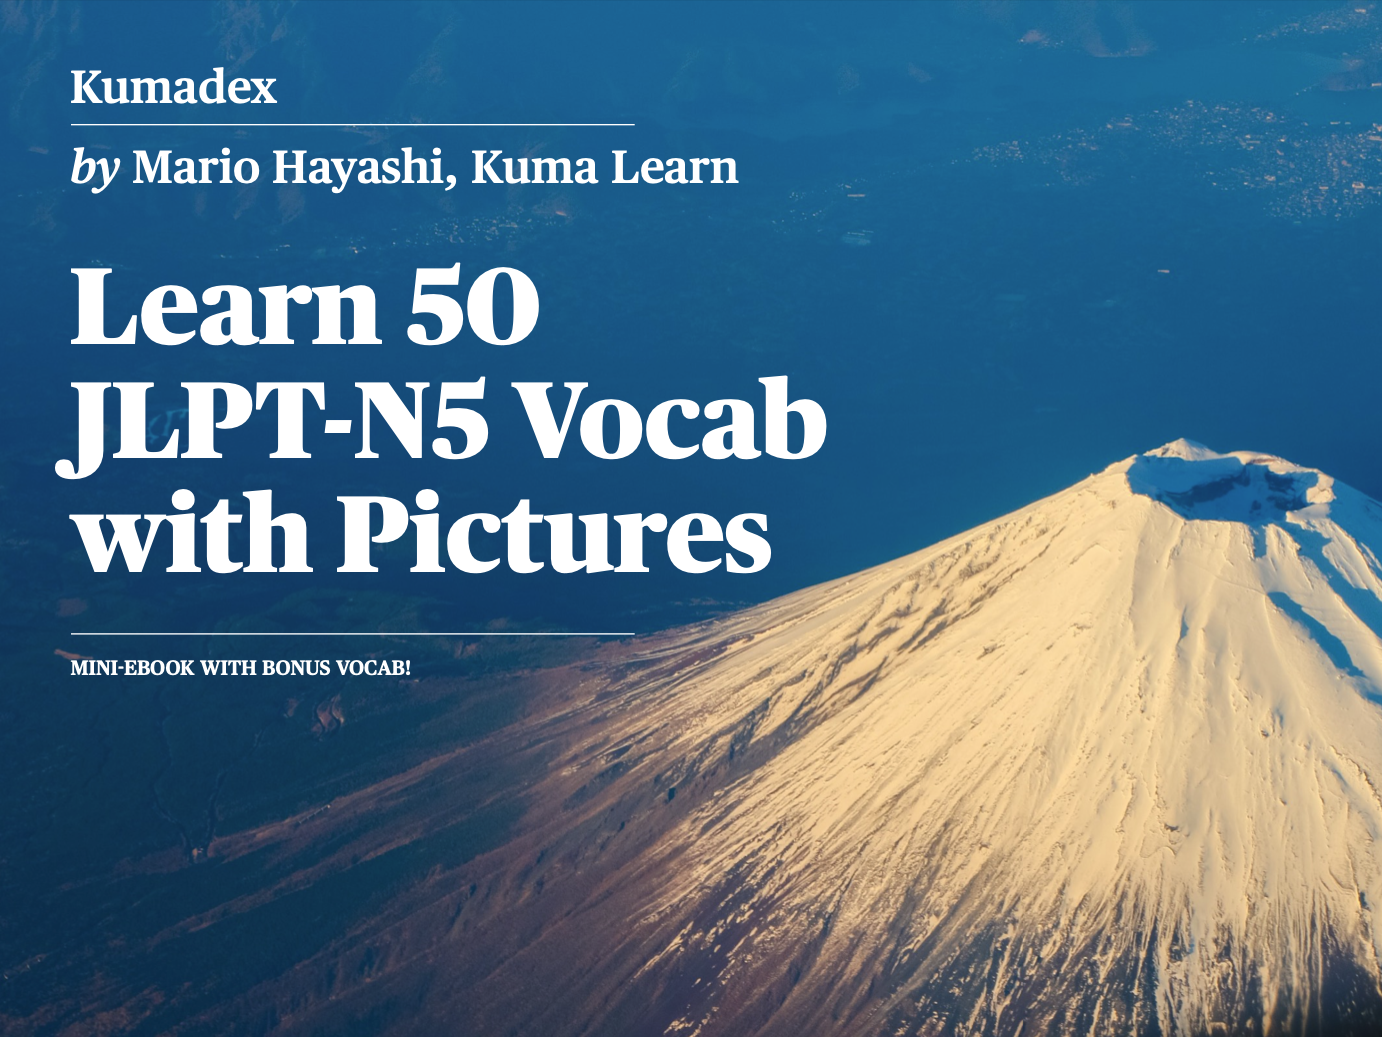 I carefully selected frequently occurring 50 JLPT-N5 words in this mini-eBook to start your visual learning journey.